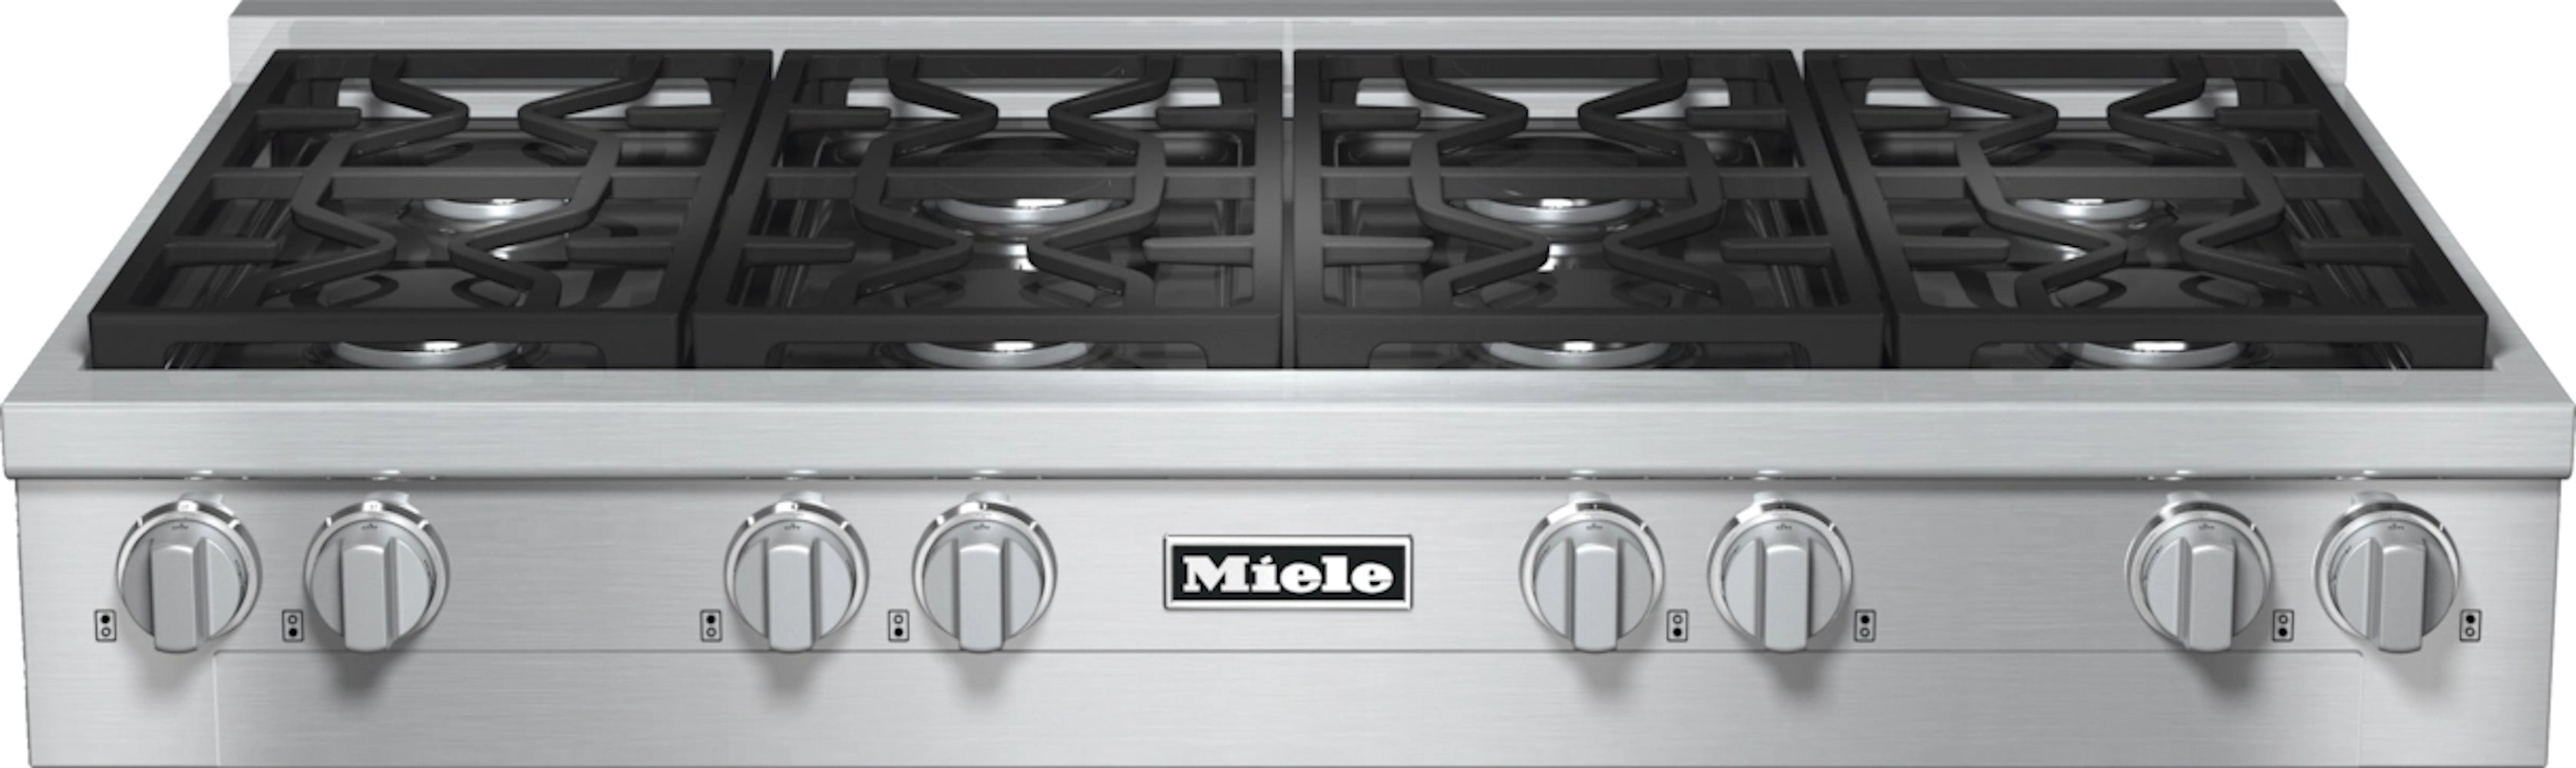 Miele - 48 Inch Gas Cooktop in Stainless - KMR 1354-3 LP